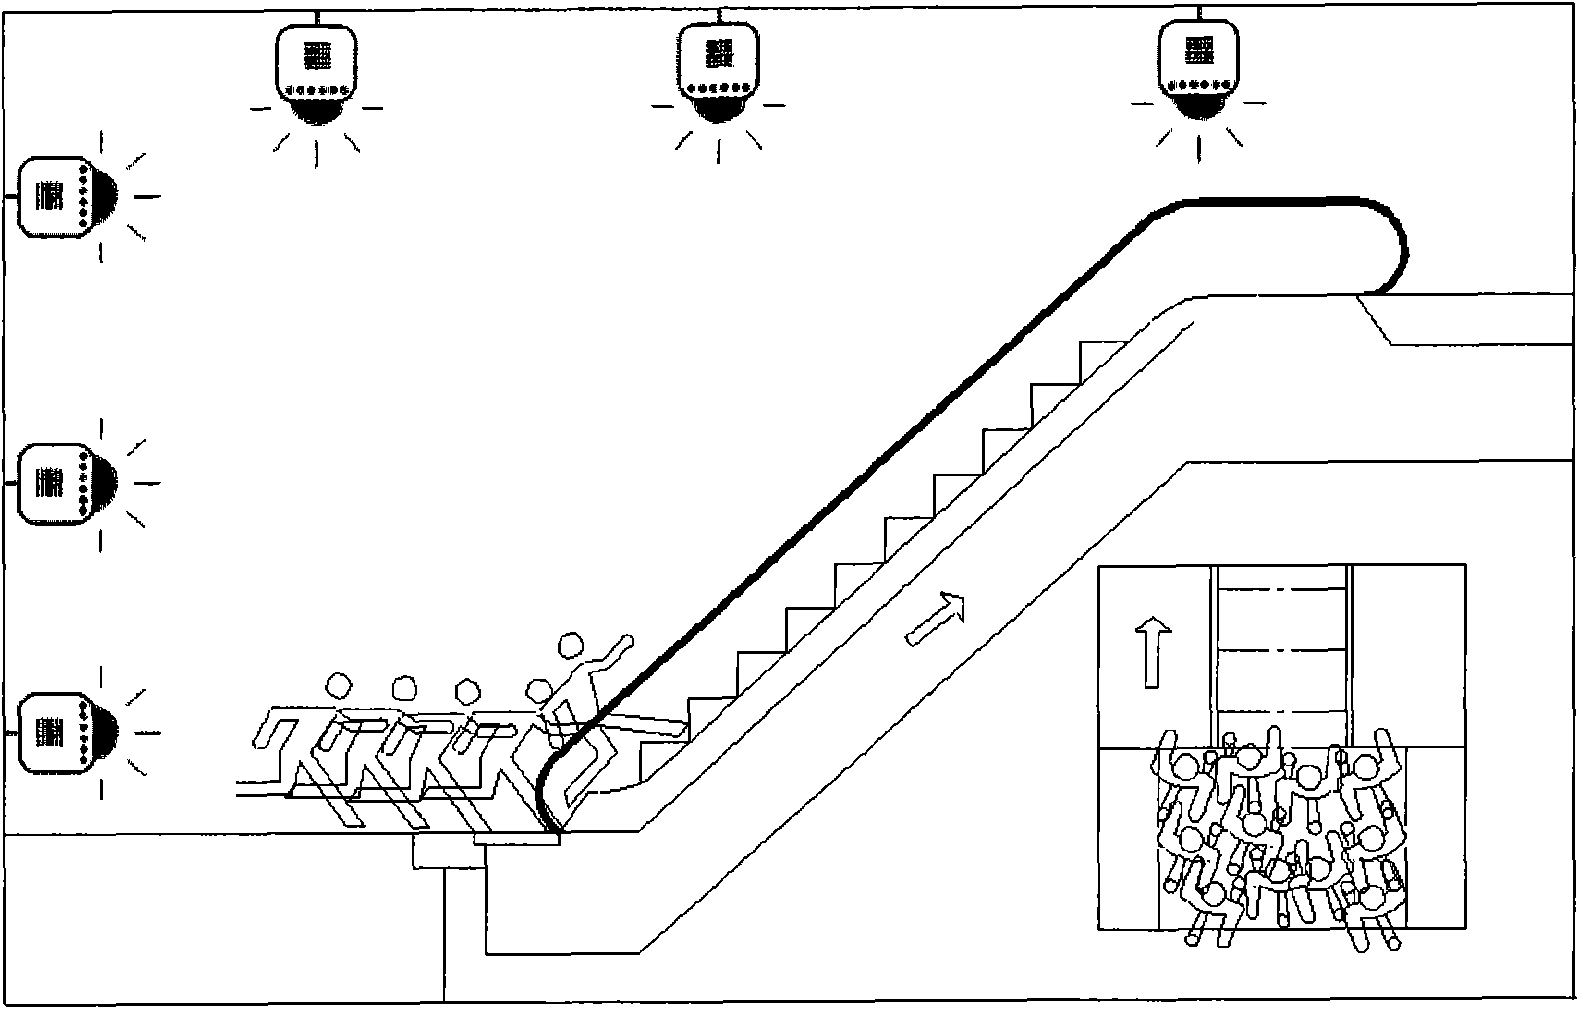 Embedded computer vision escalator pedestrian flow supervision and alarm device